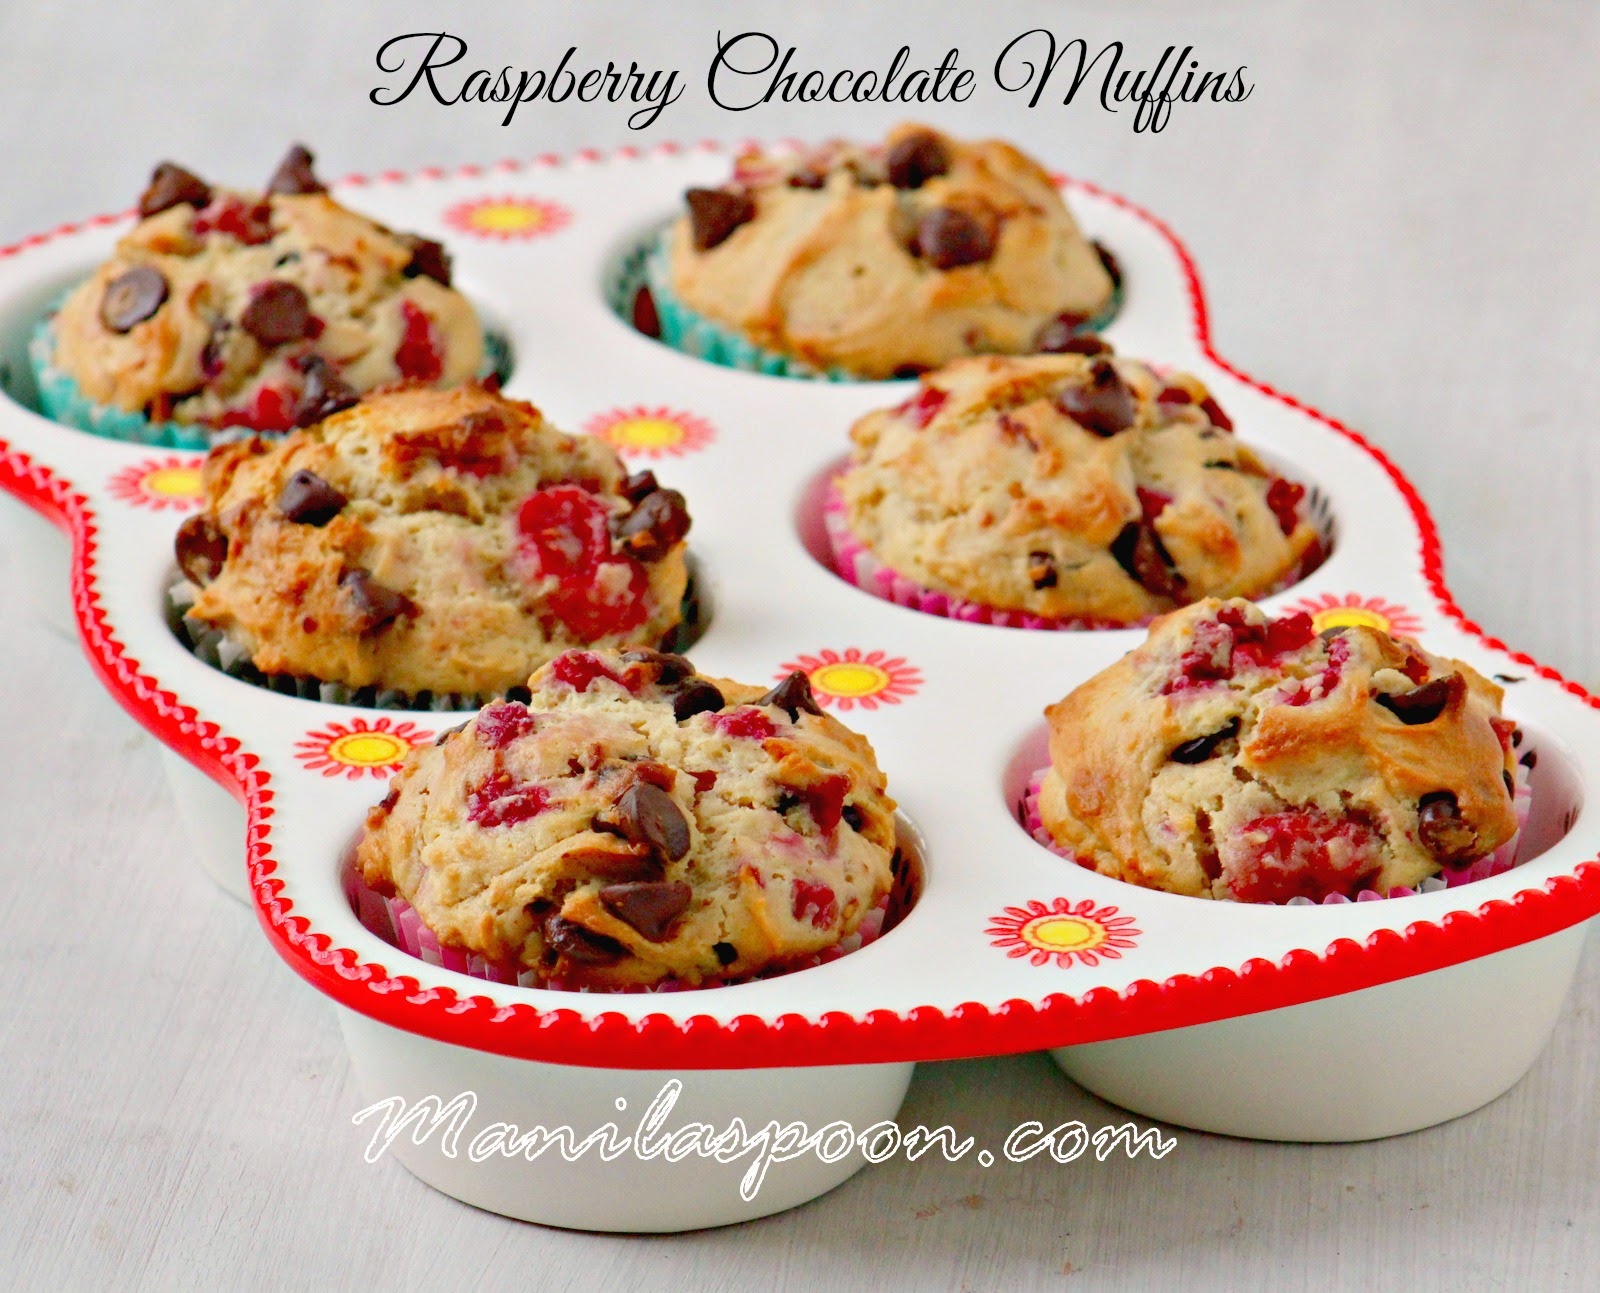 Fresh raspberries provide a sweet-tangy contrast to chocolate in these more-ish, moist and totally scrumptious muffins! Great for breakfast or anytime you feel like snacking. #raspberry #chocolate #muffins